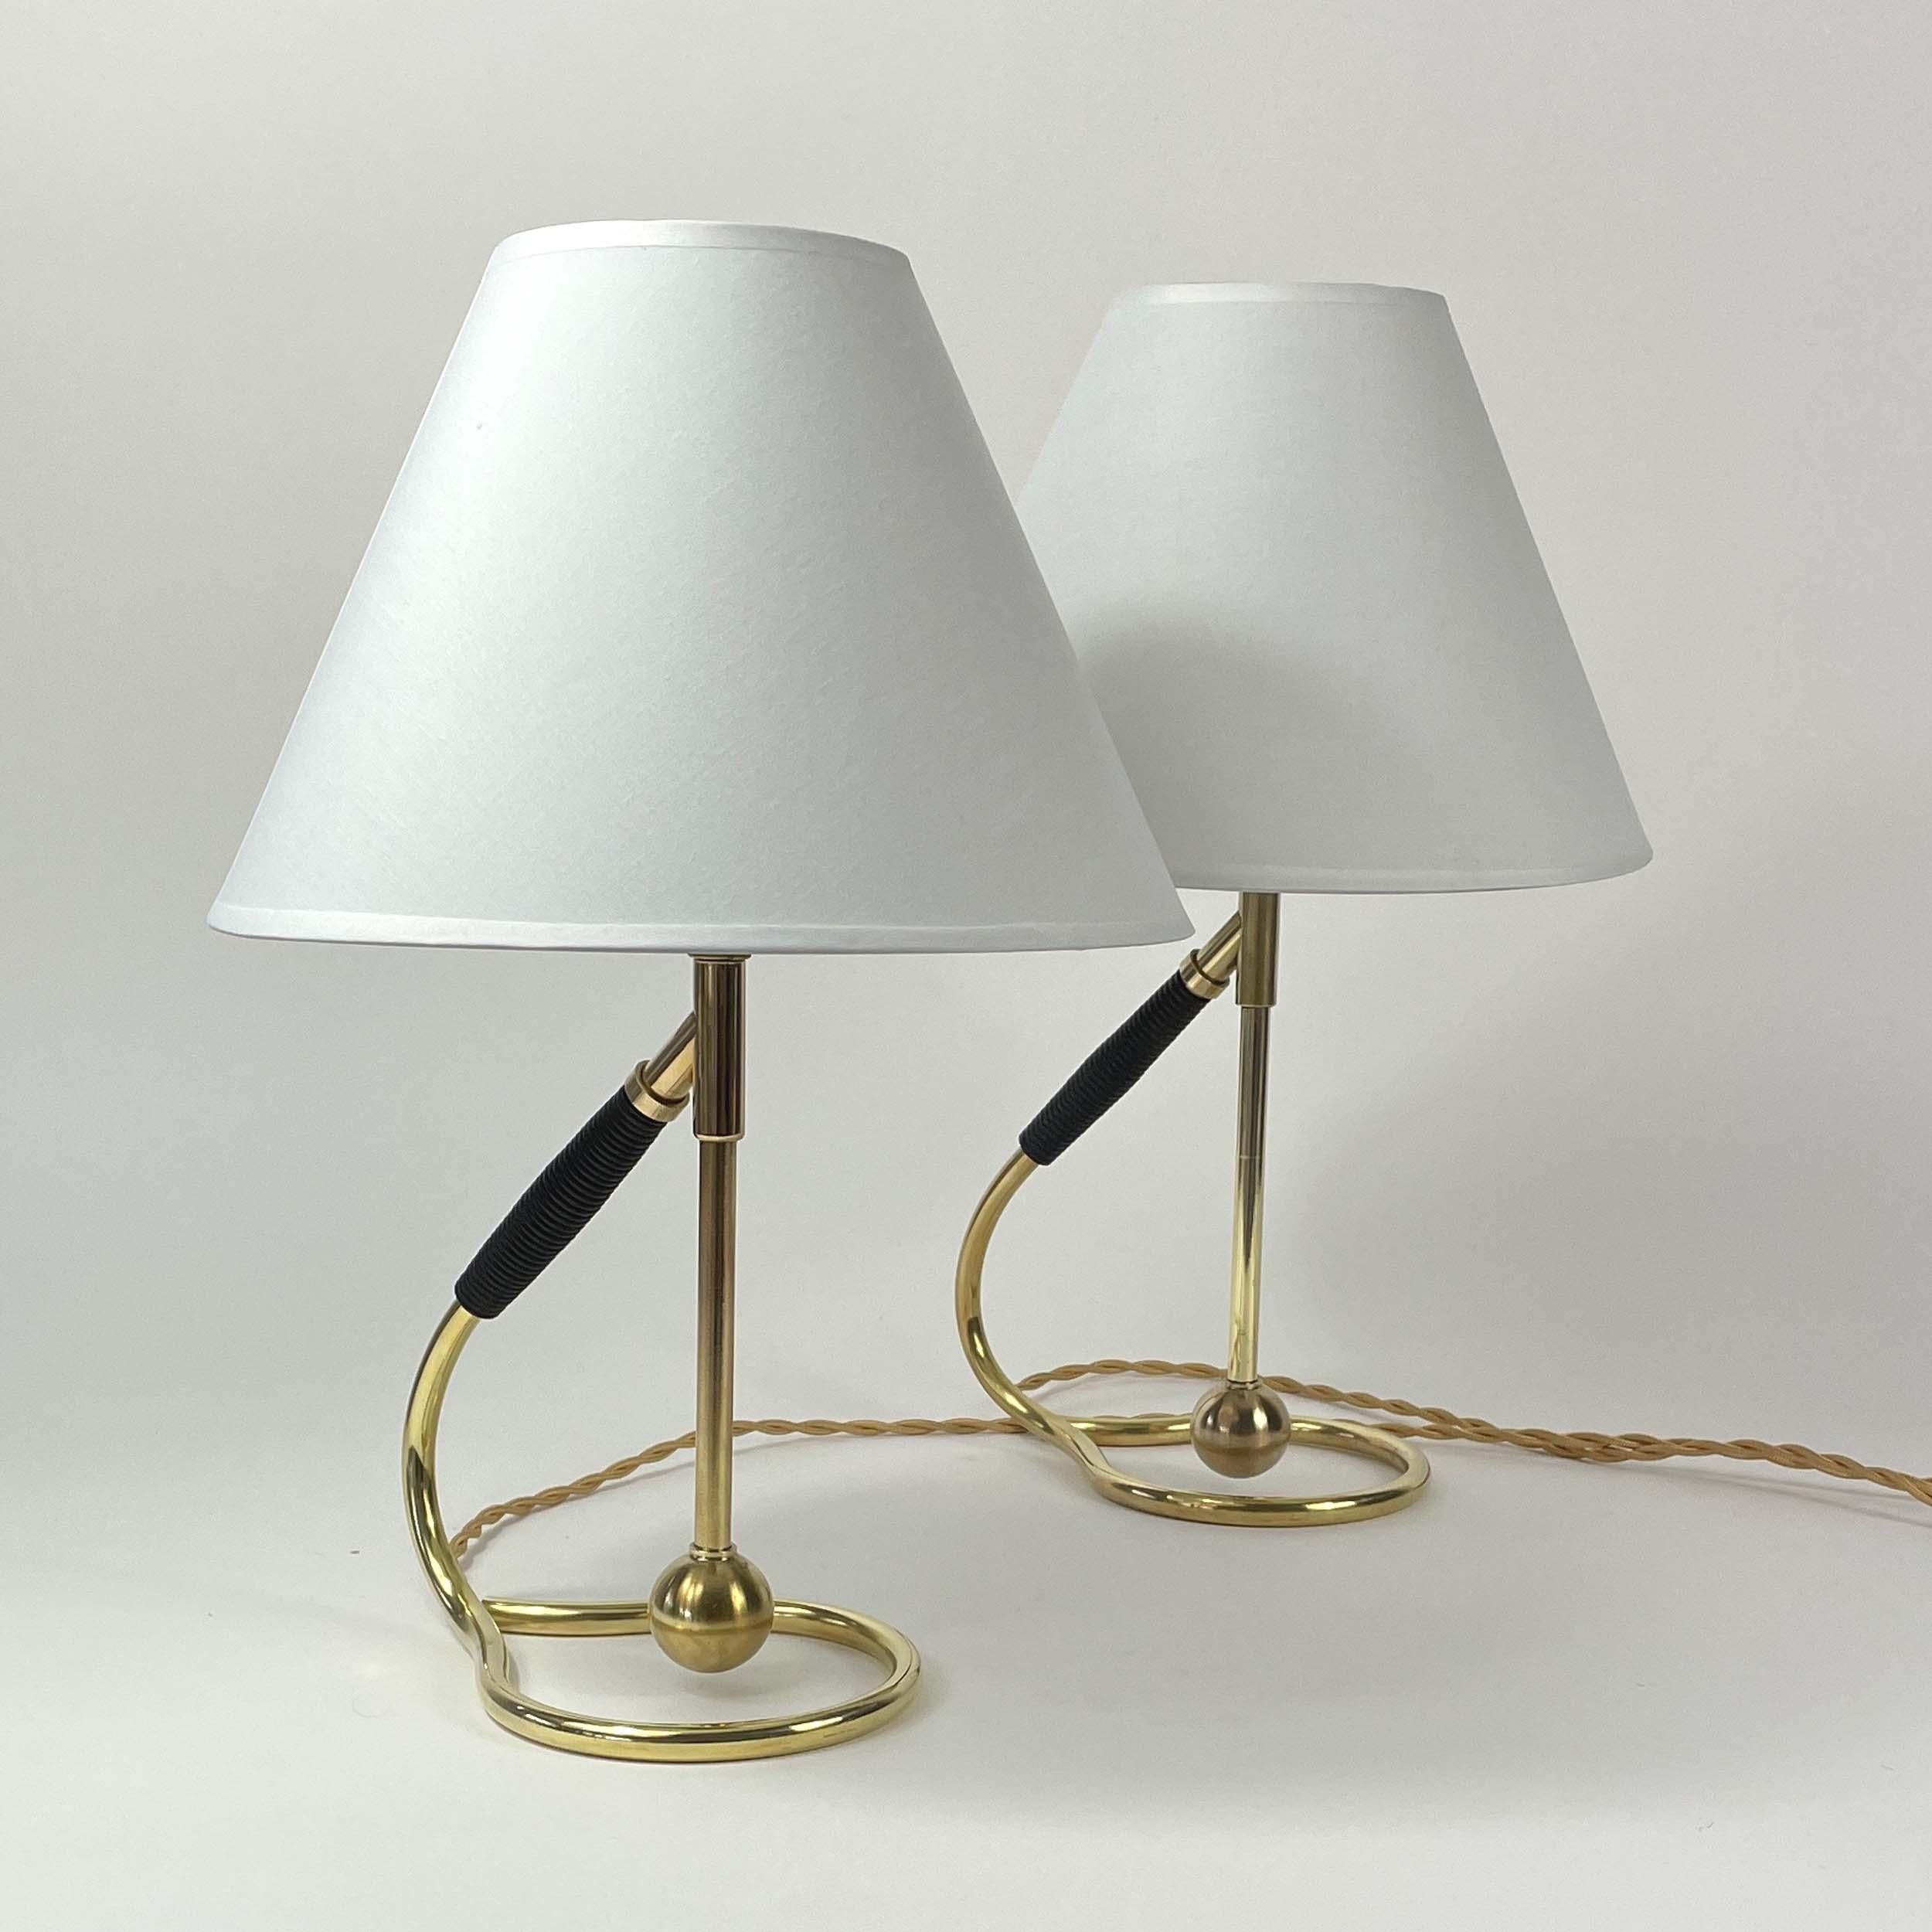 Danish Adjustable Brass and Bakelite Wall and Table Lights 306 by Kaare Klint, 1950s For Sale